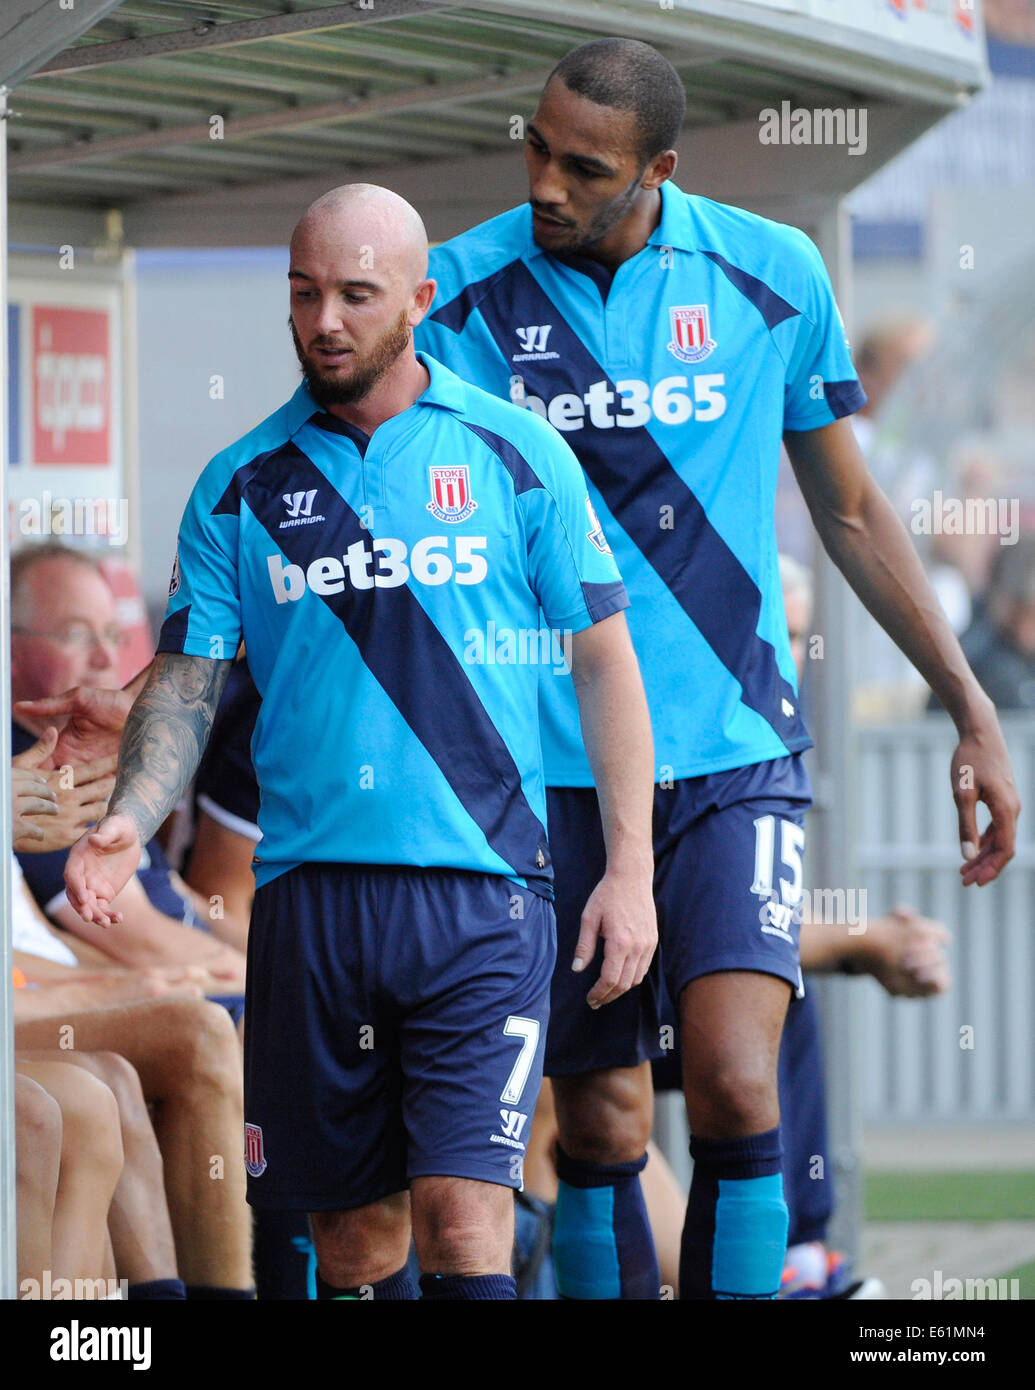 Stoke's Stephen Ireland (L) and Steven N'Zonzi walk past the substitutes' bench during the soccer test match between SC Freiburg and Stoke City F.C. in Freiburg, Germany, 09 August 2014. Photo: Achim Keller/dpa Stock Photo